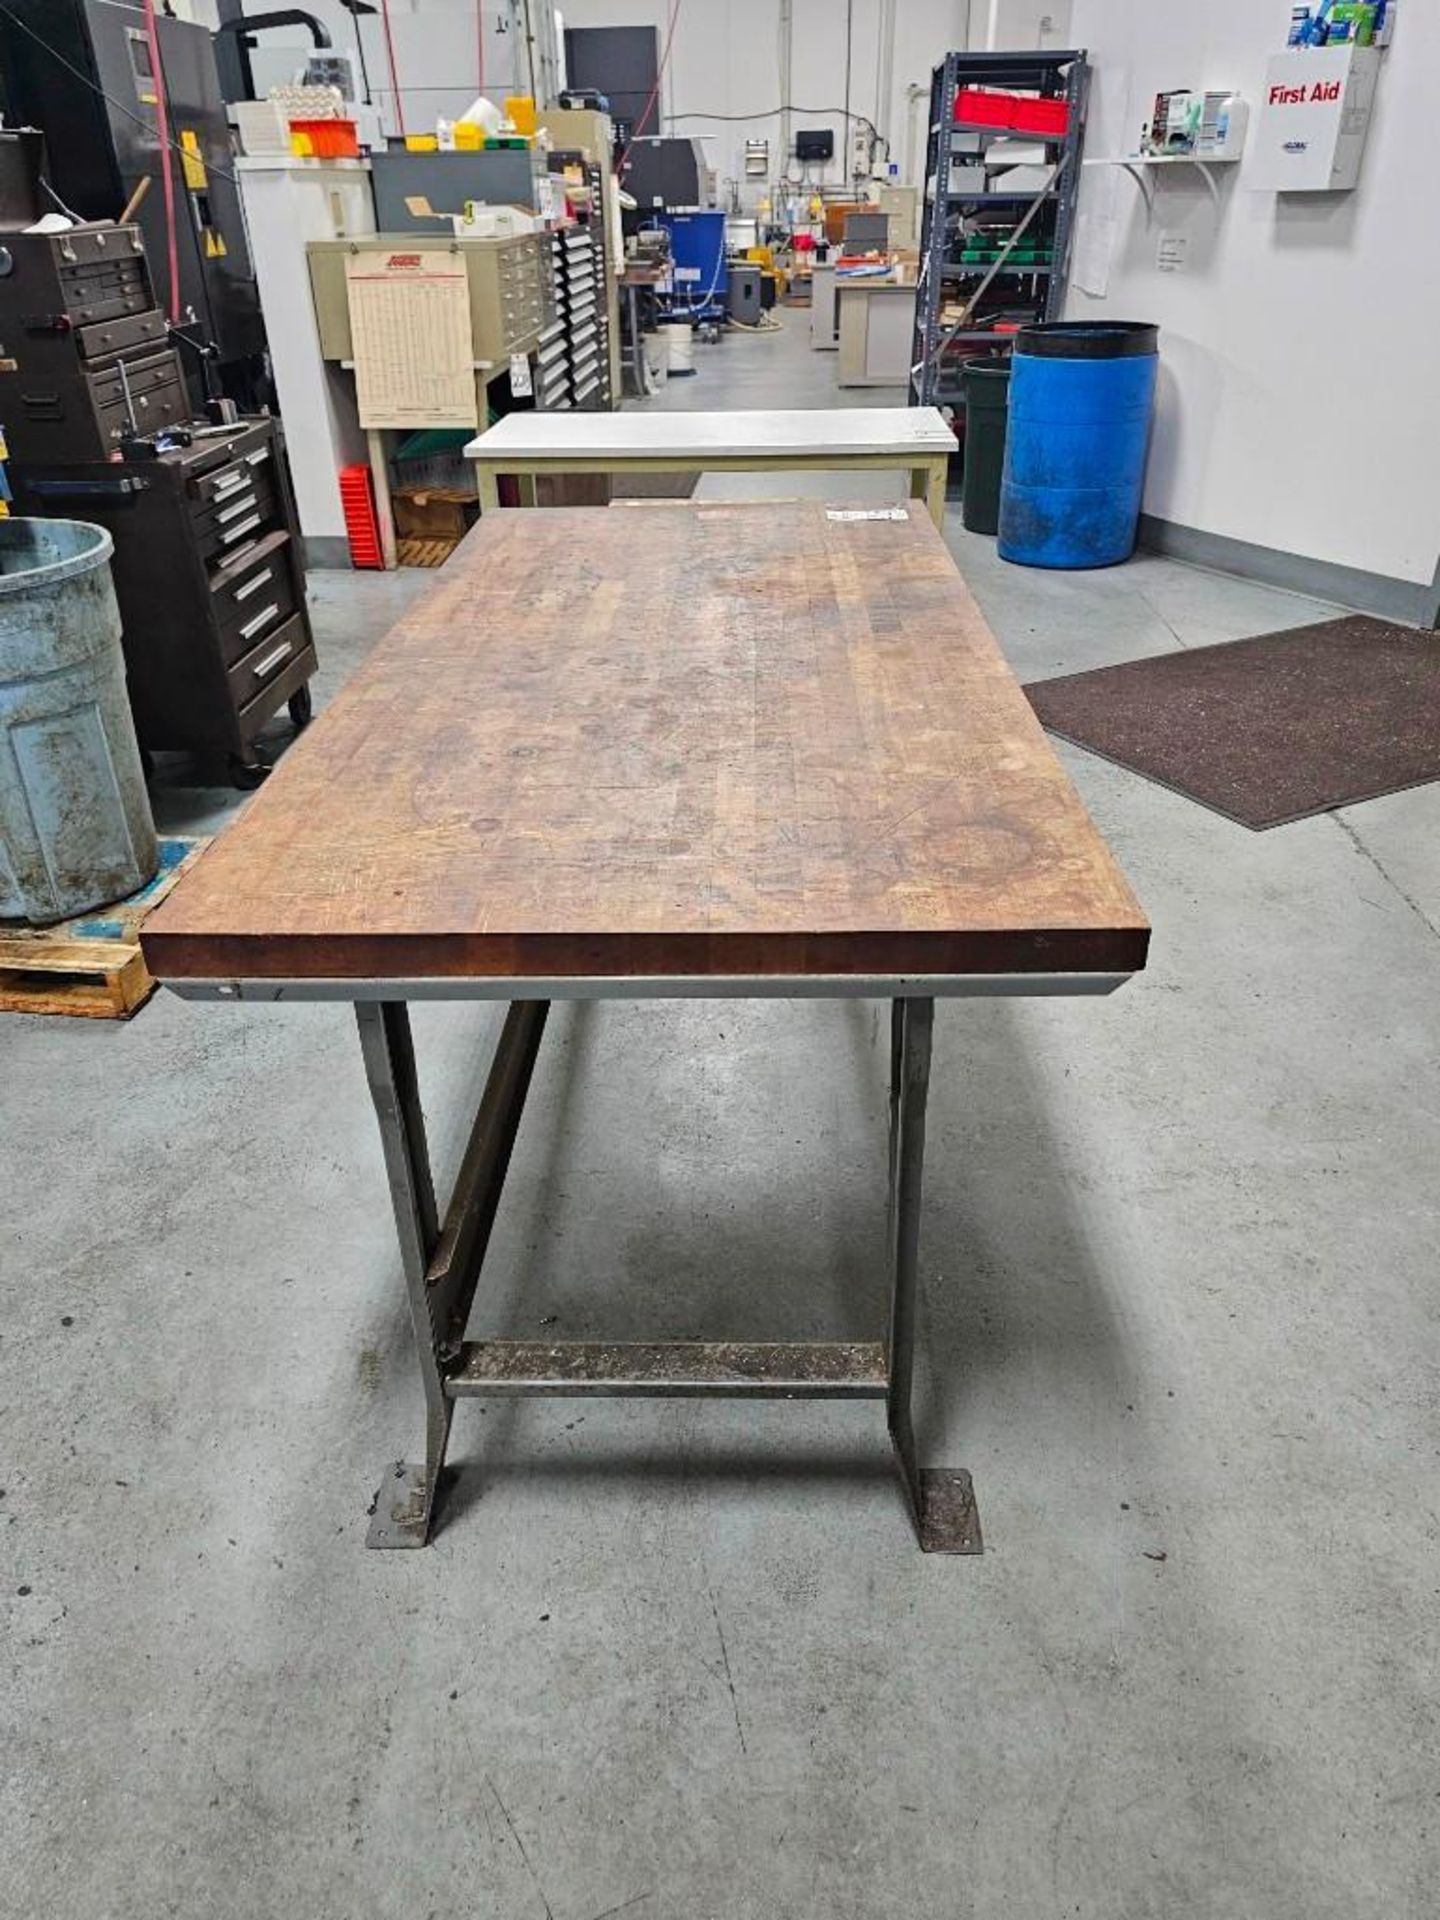 WOOD TABLE WORKBENCH WITH METAL LEGS - Image 2 of 4